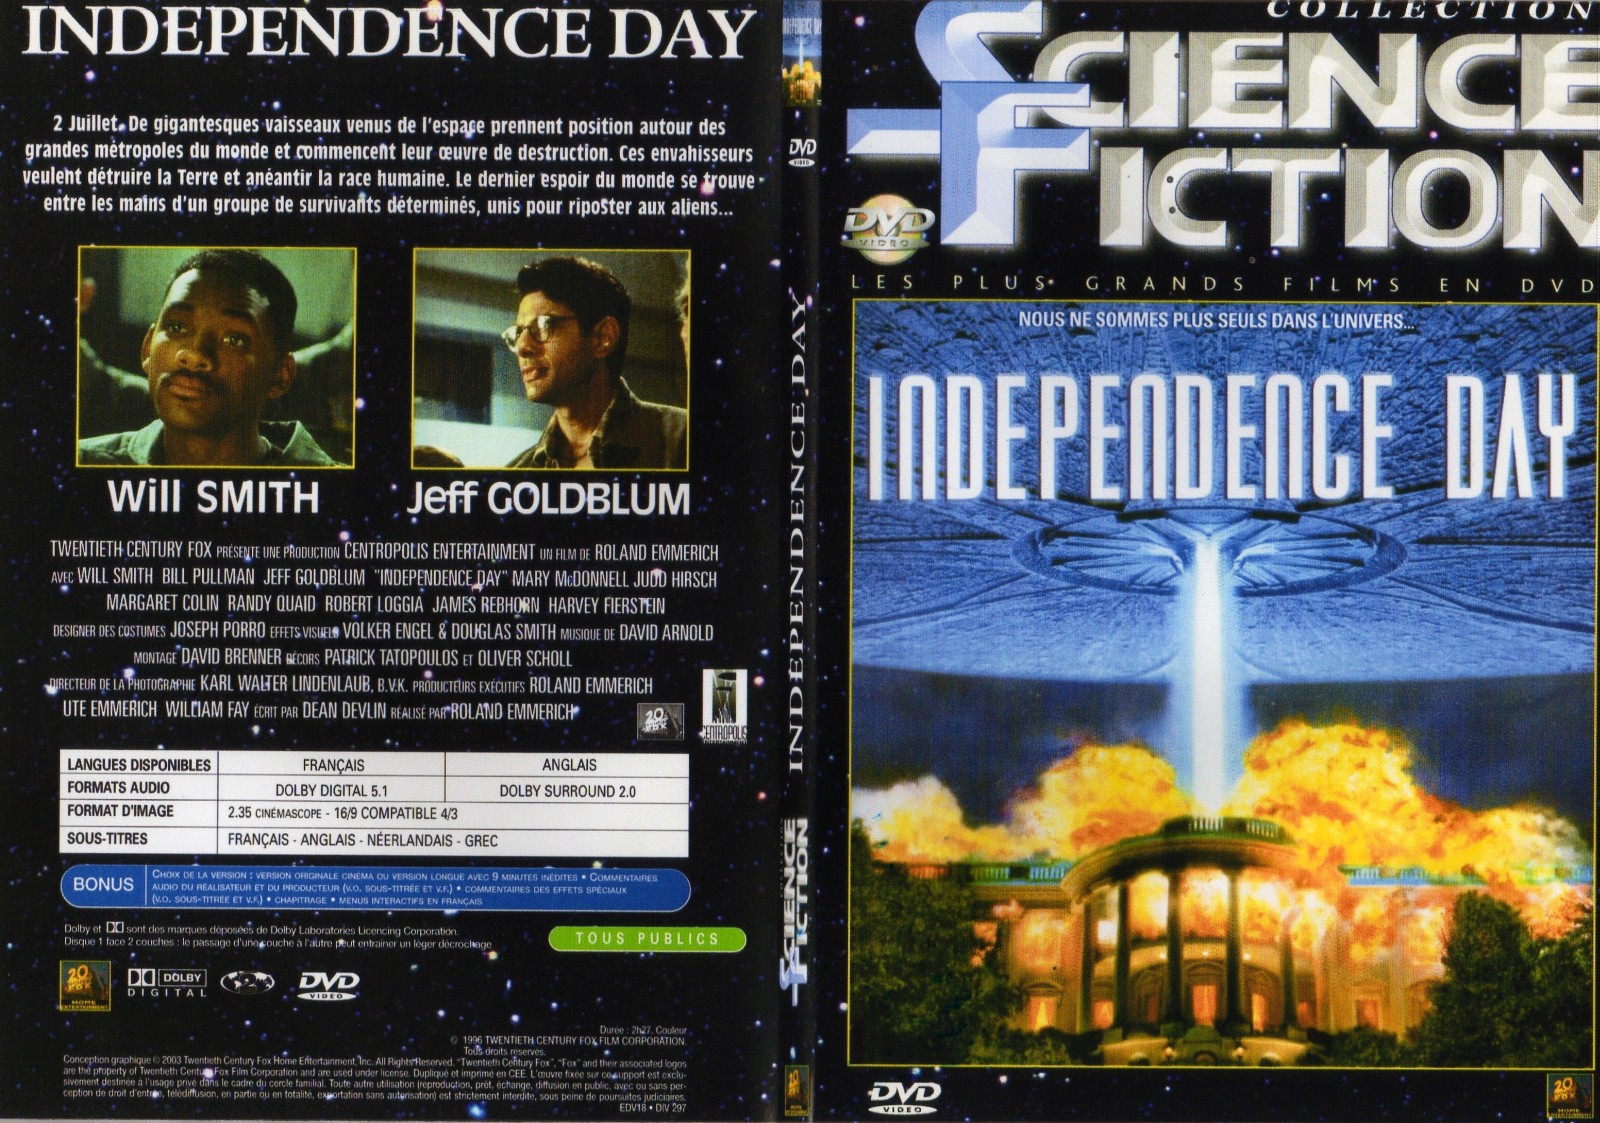 Jaquette DVD Independence day - SLIM